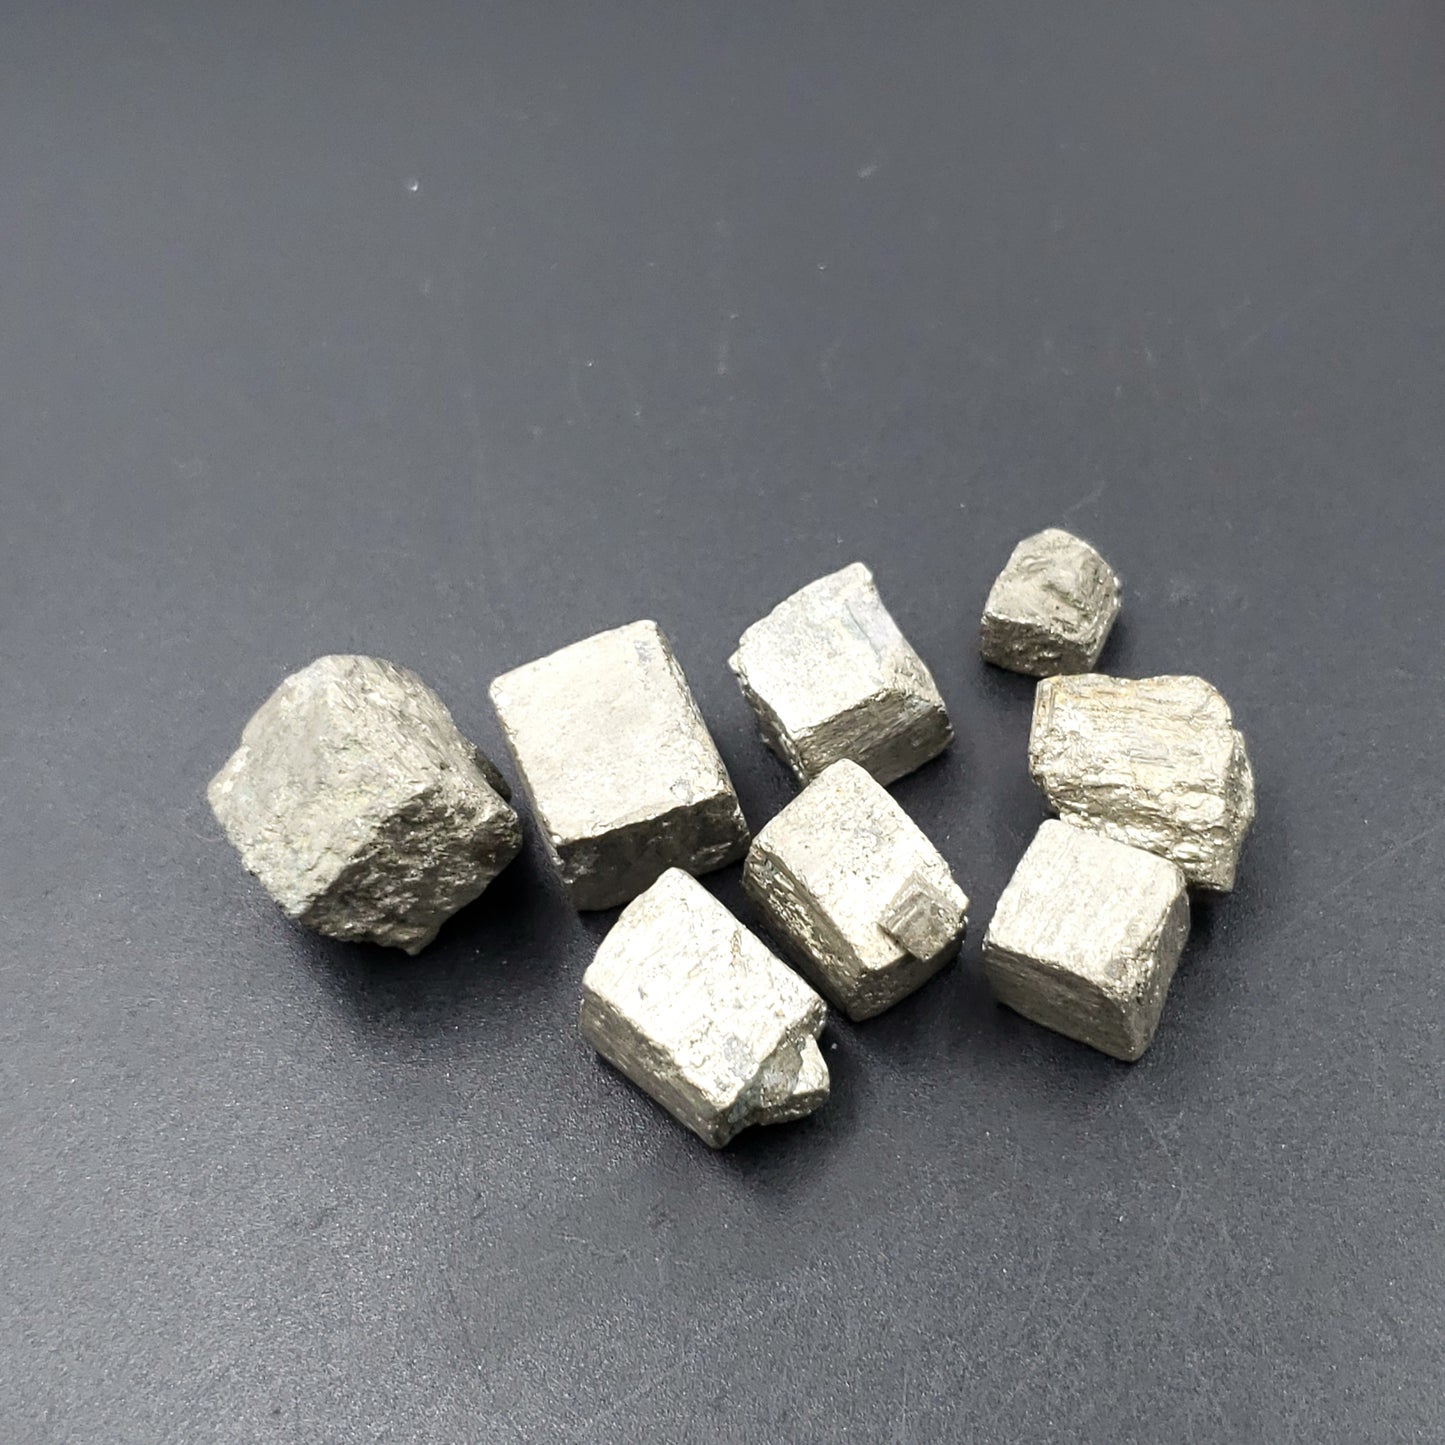 Pyrite Cube Rough Stone Small - Elevated Metaphysical